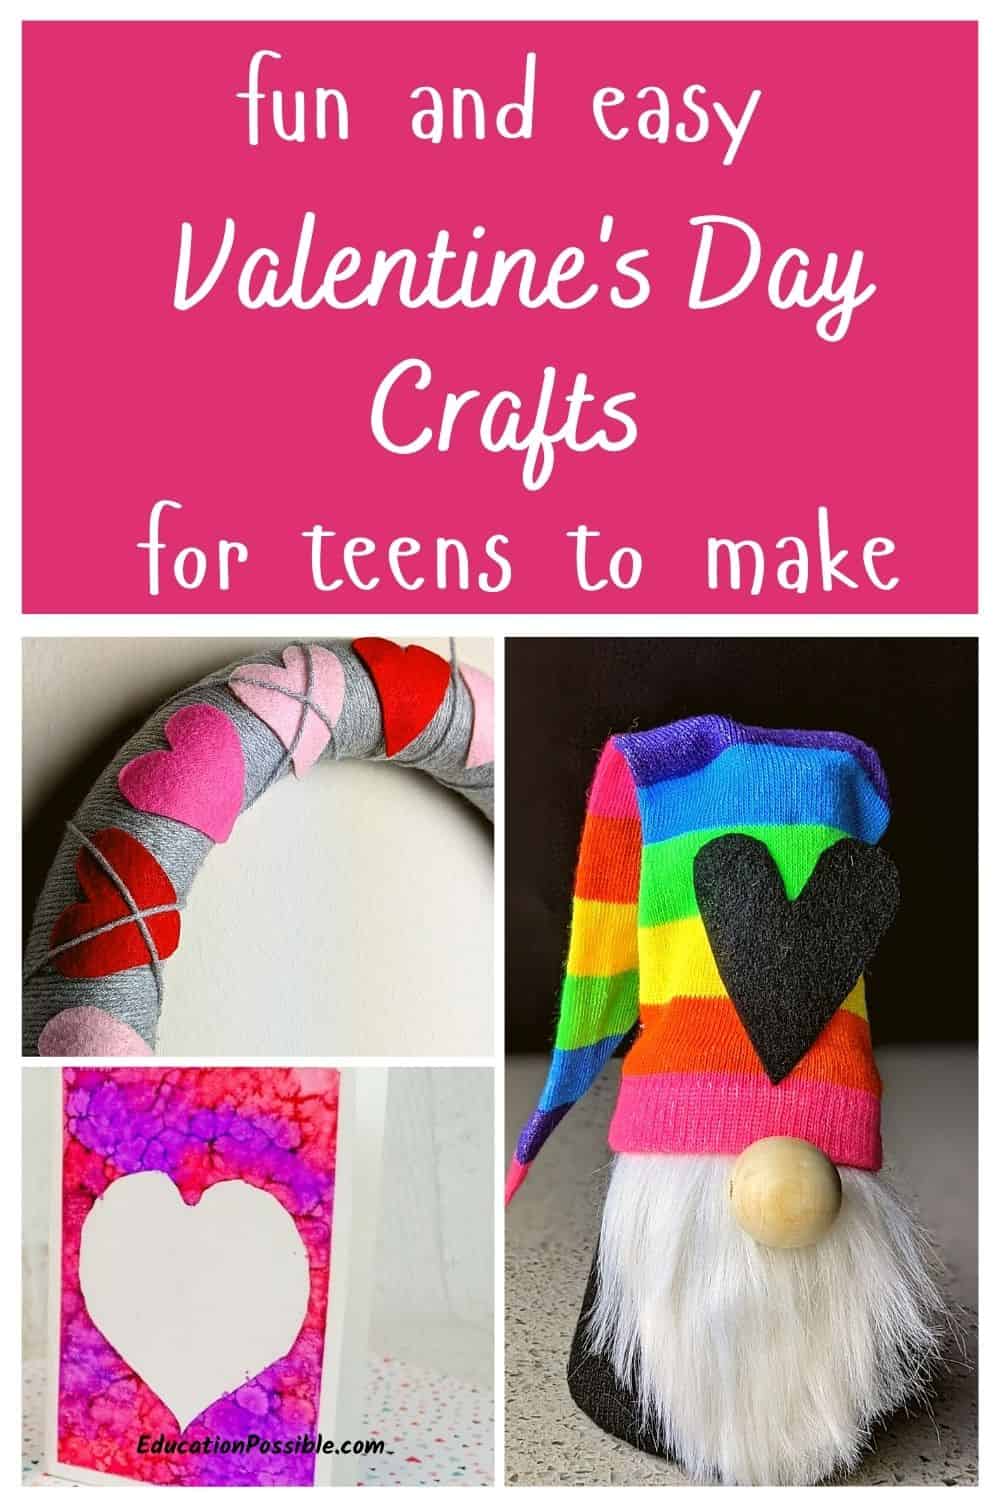 Fun and Easy Valentine’s Day Crafts for Teens to Make